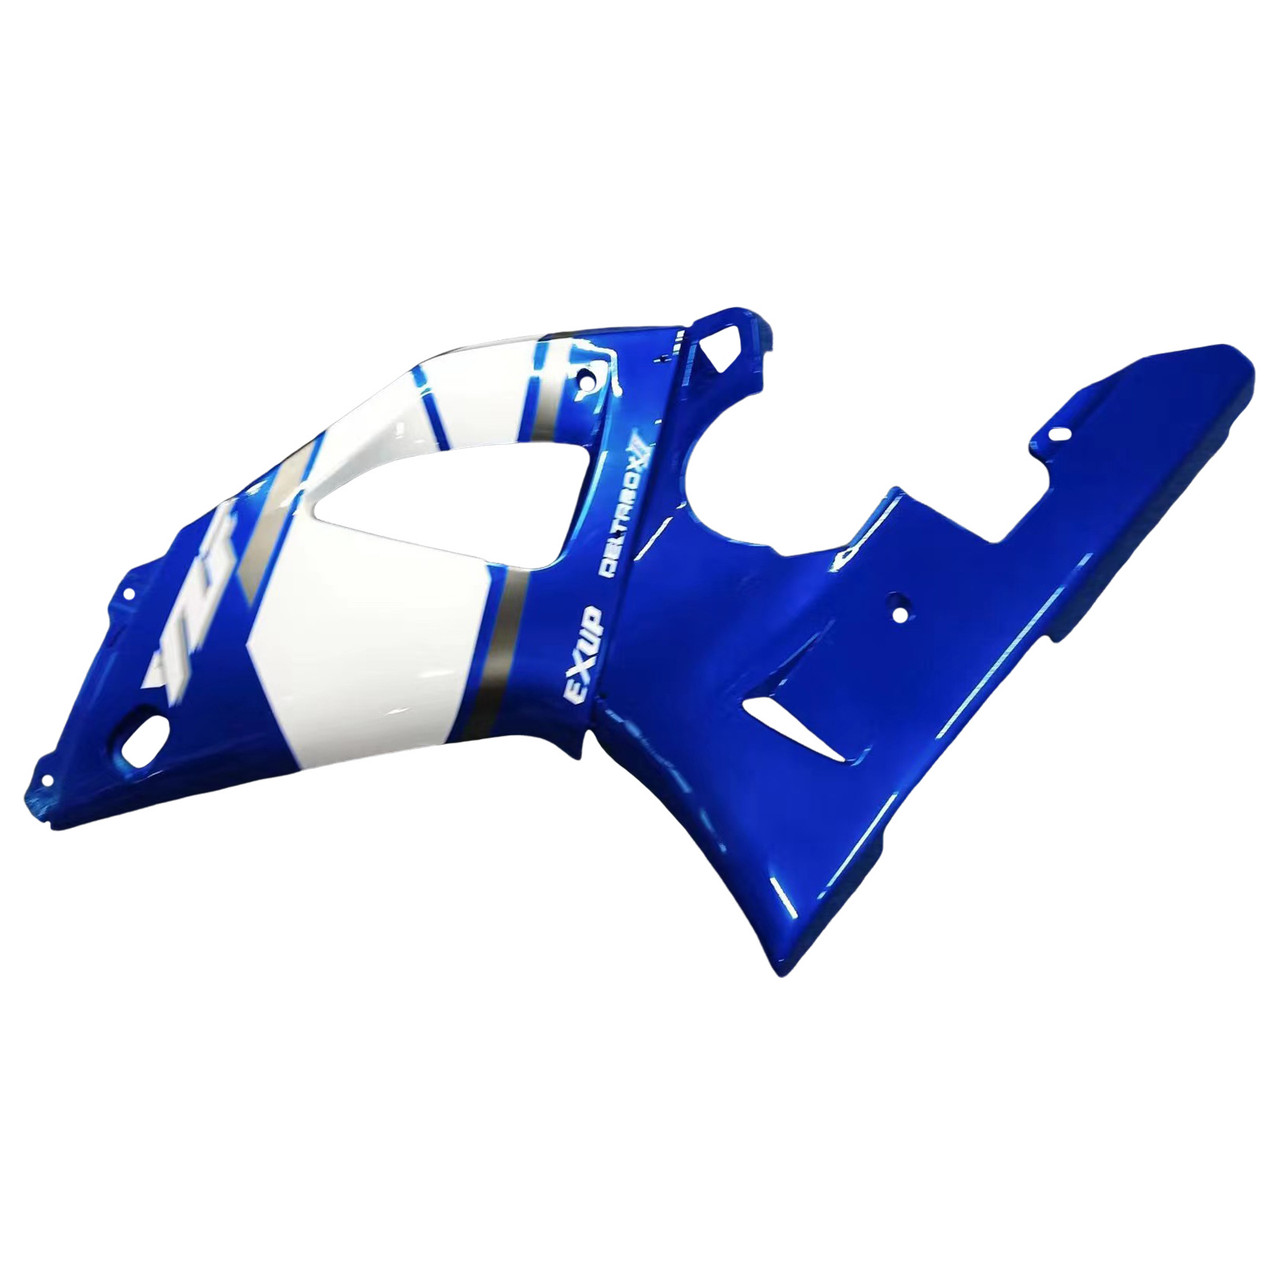 Amotopart ABS Injection Plastic Kit Fairing Fit Yamaha YZF R1 2000-2001 Blue